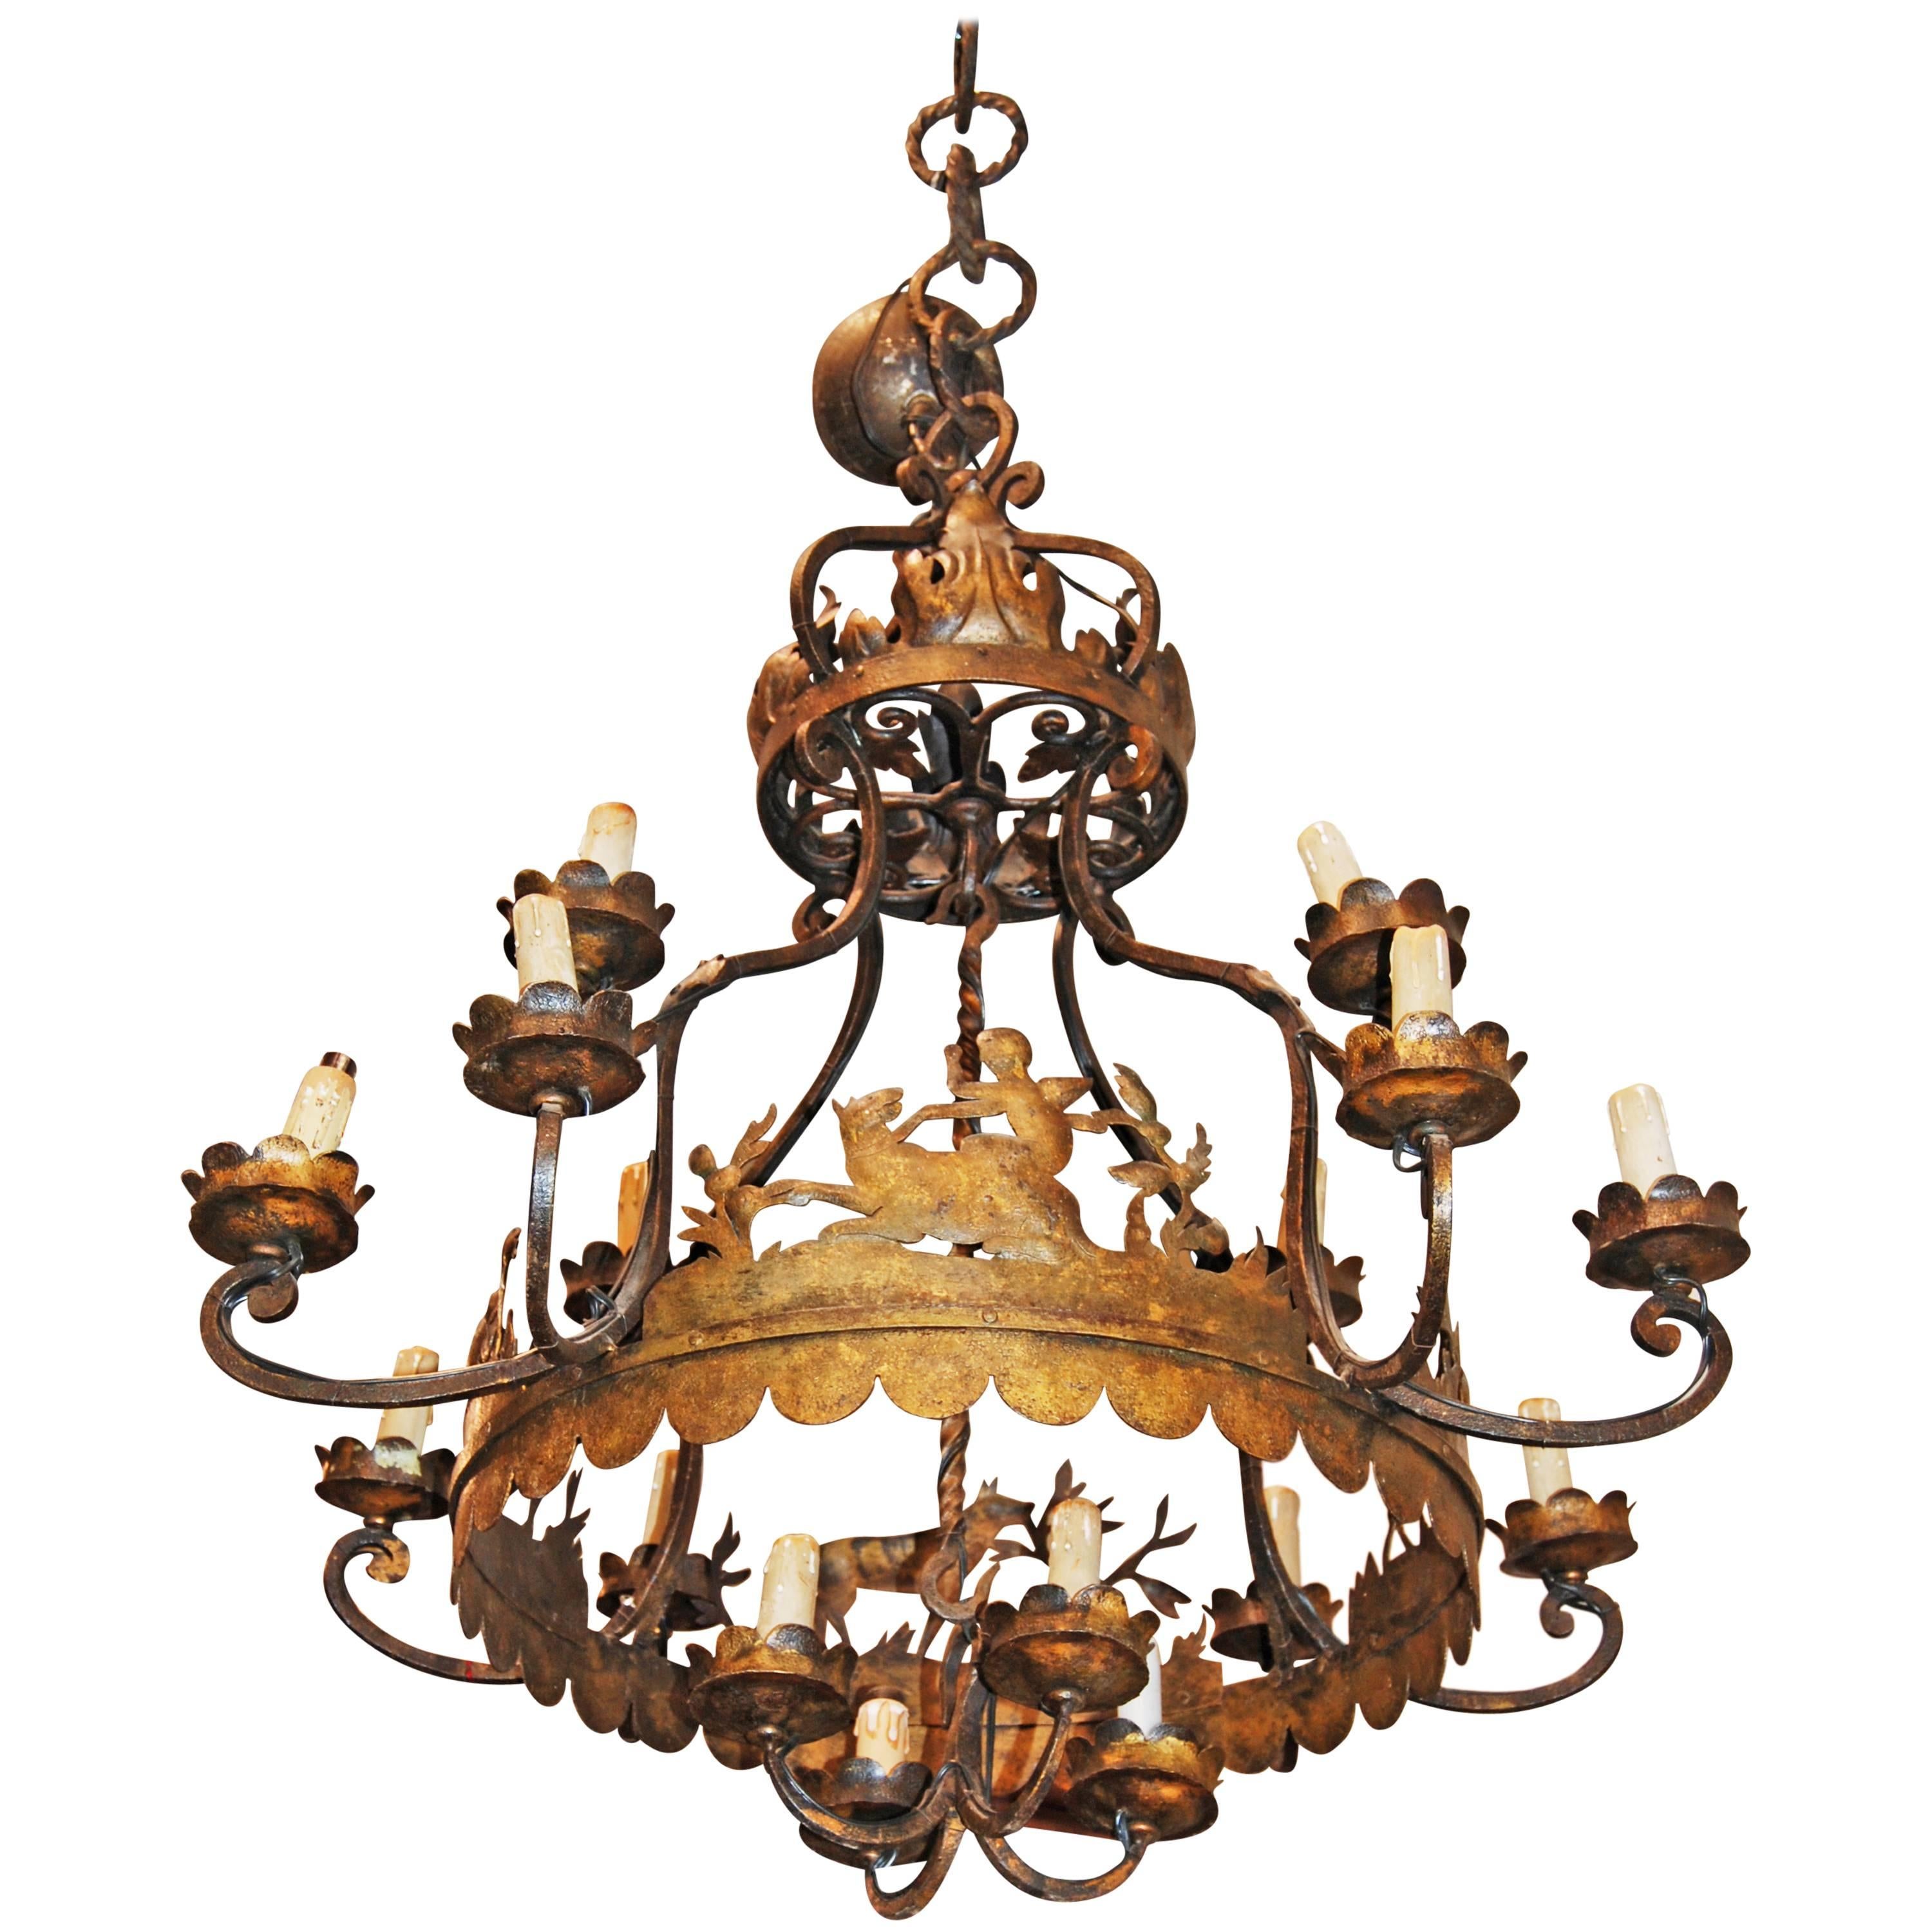 Unusual Whimsical 19th Century Iron Chandelier